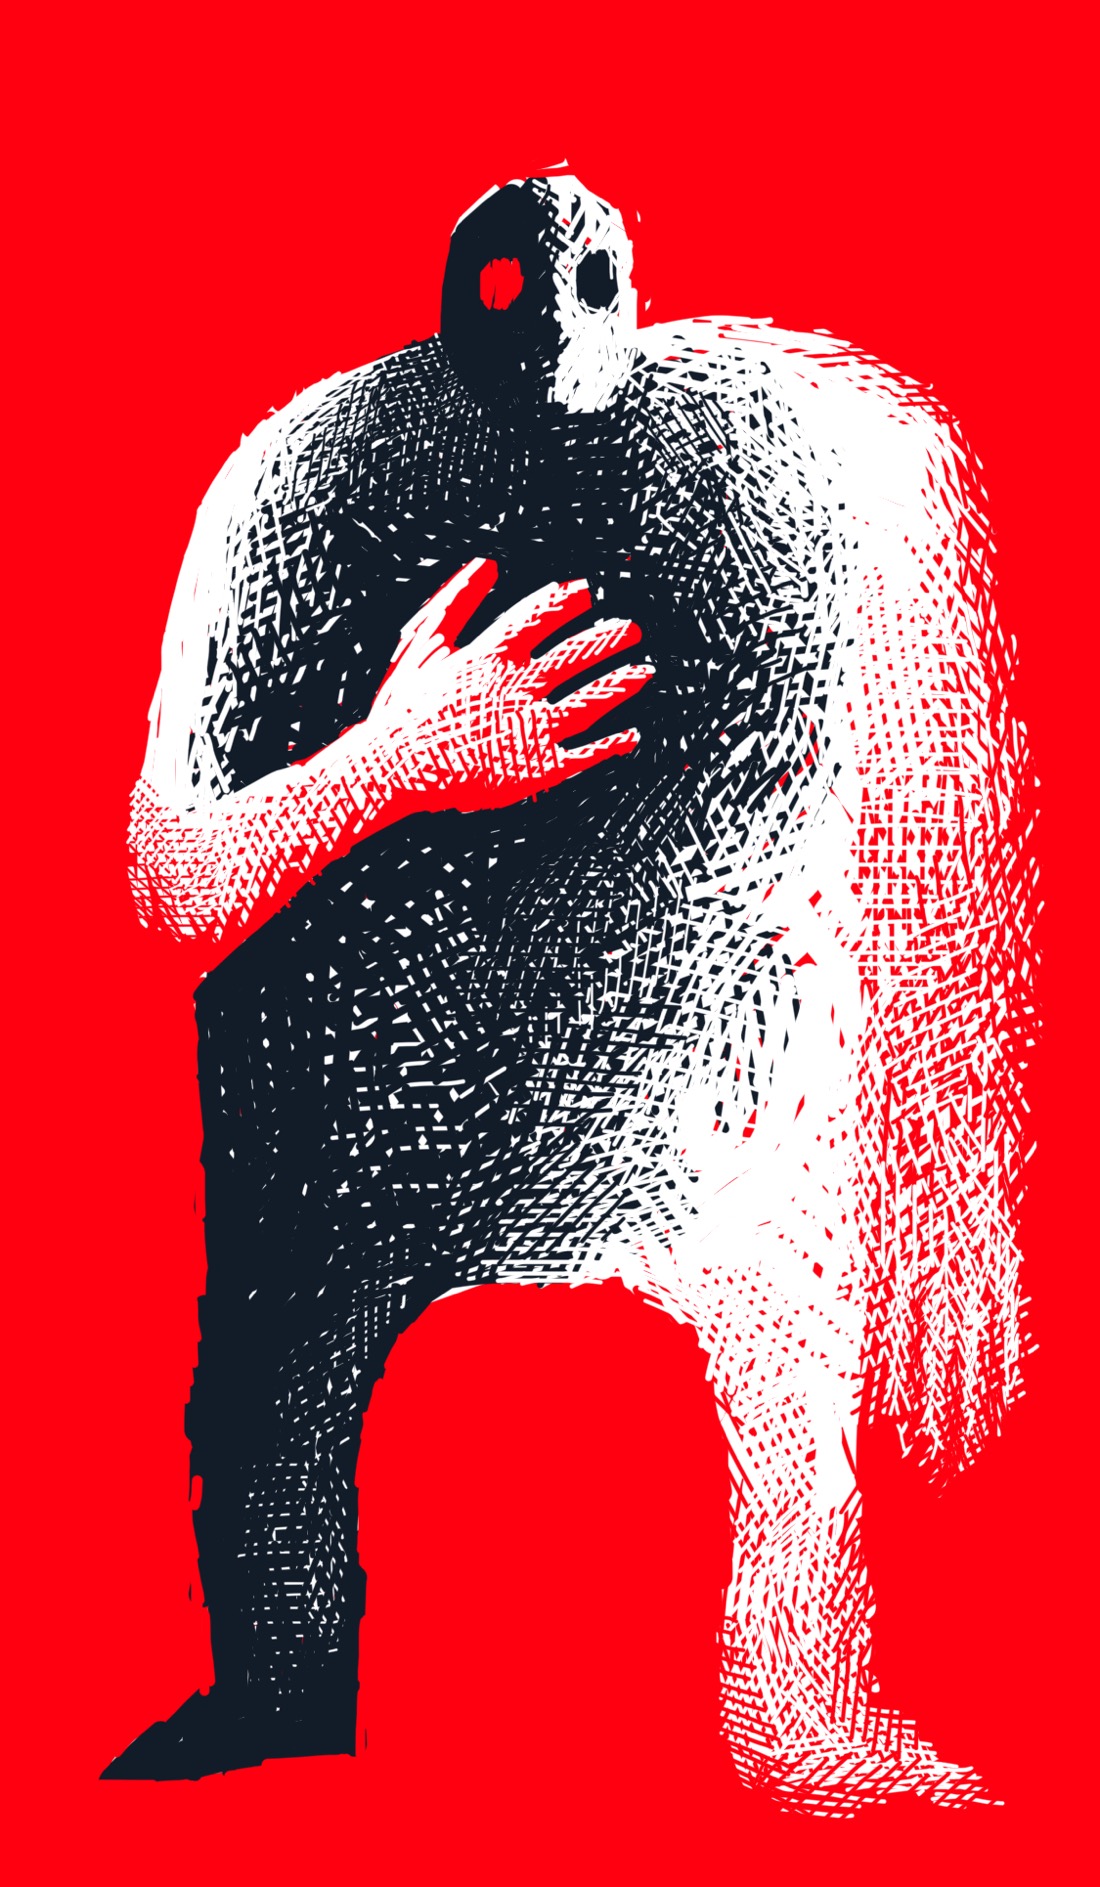 A hulking, humanoid figure that could only be described as "vast", in the way that a gorilla is vast. The figure is set against a bright red background. The right side of the figure is black, as though in shadow; the left side is white. The figure's right hand is placed across its chest, as if it is taking an oath. The left side is blurry and foggy; fading away, or not all there to begin with.